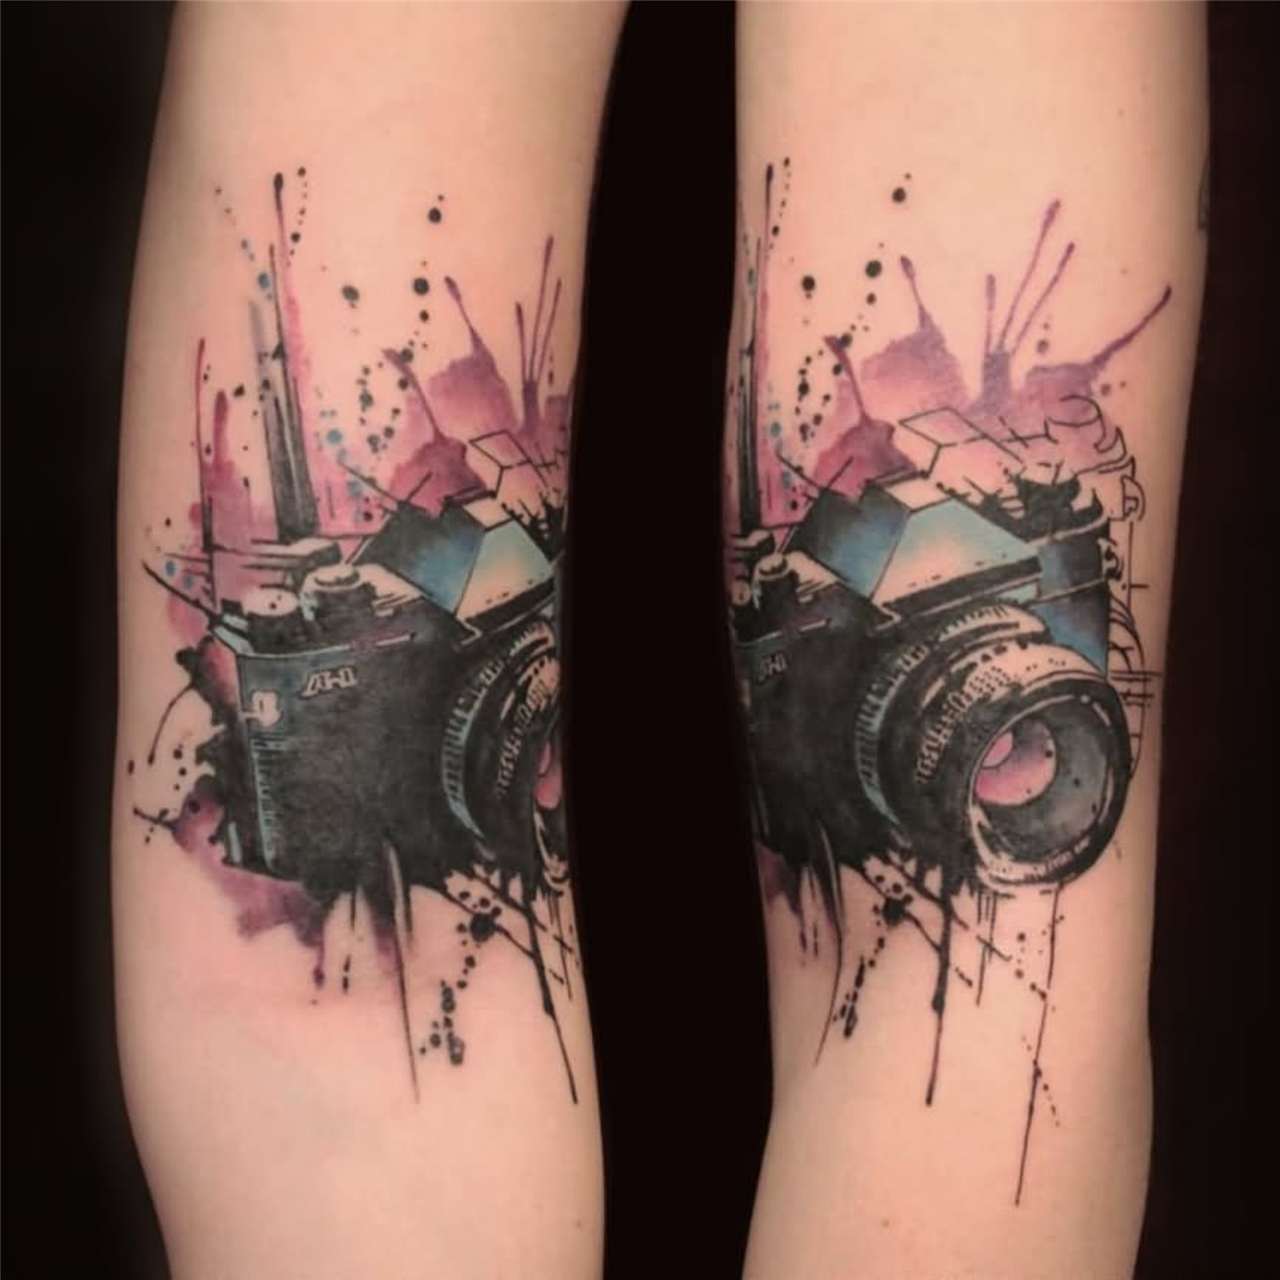 Do You Love Photography? Then Camera Tattoos Are Best For You.